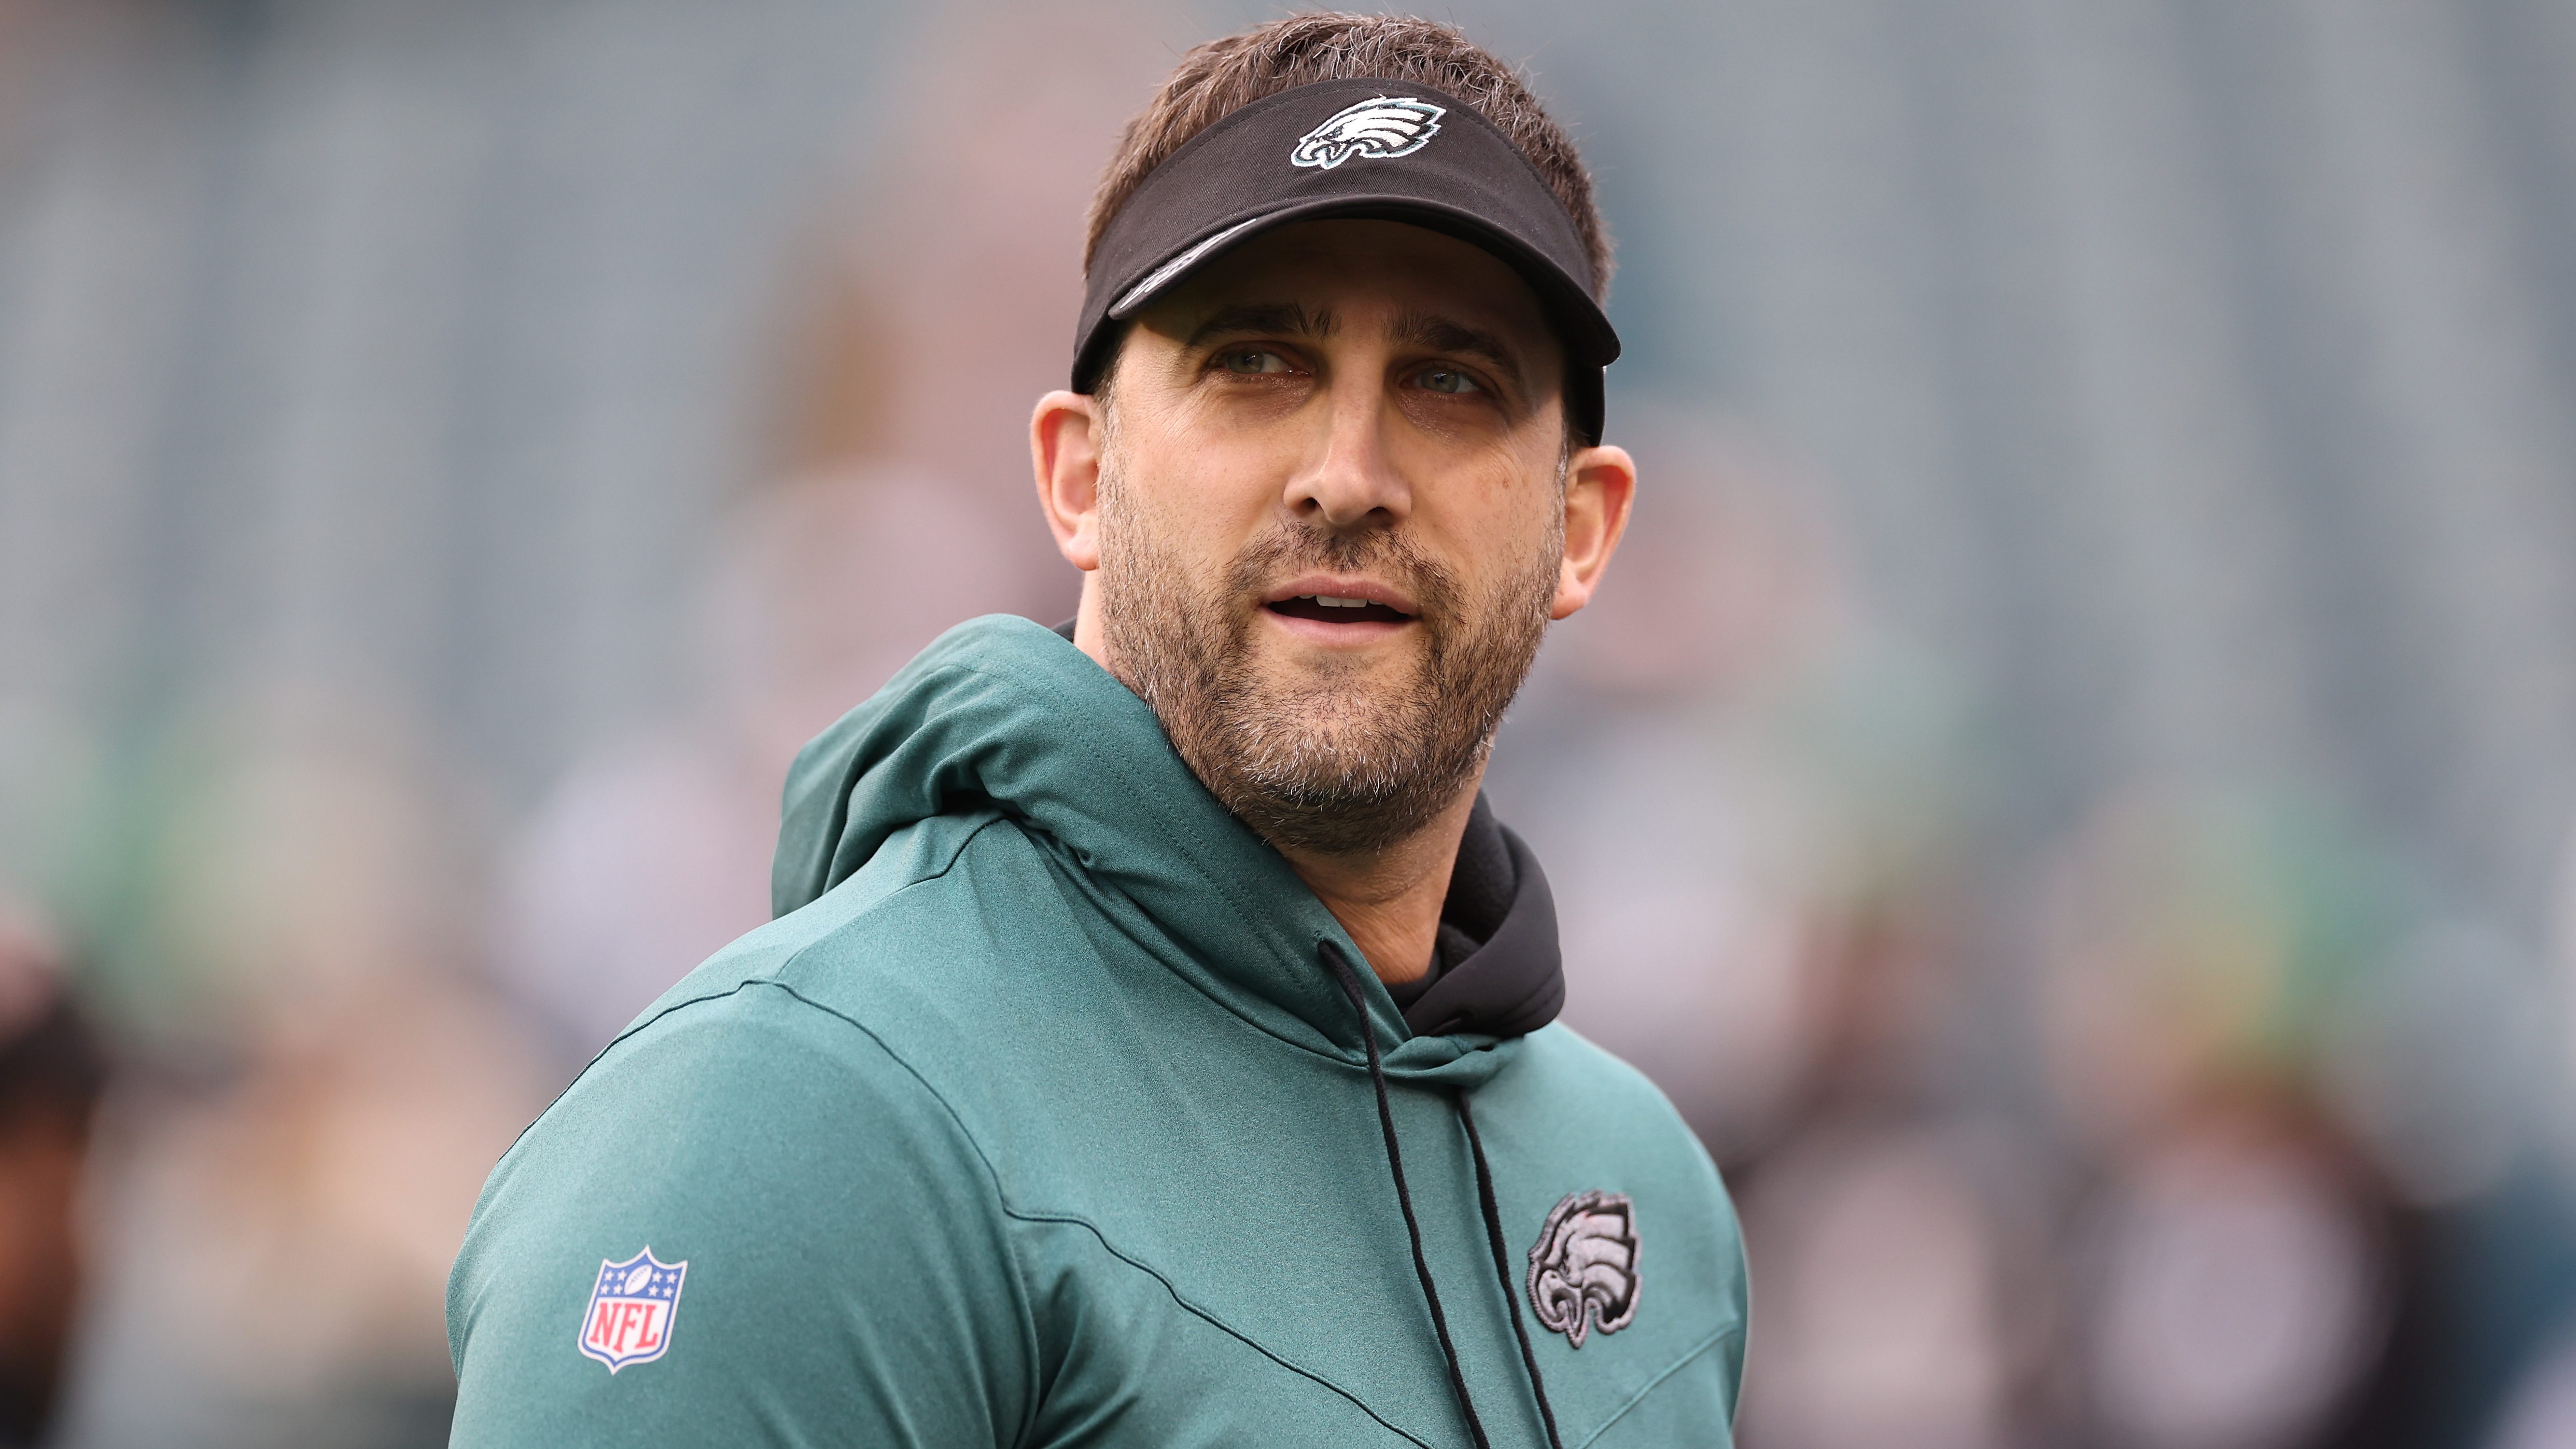 Eagles Coach Nick Sirianni Accepts Important New Position